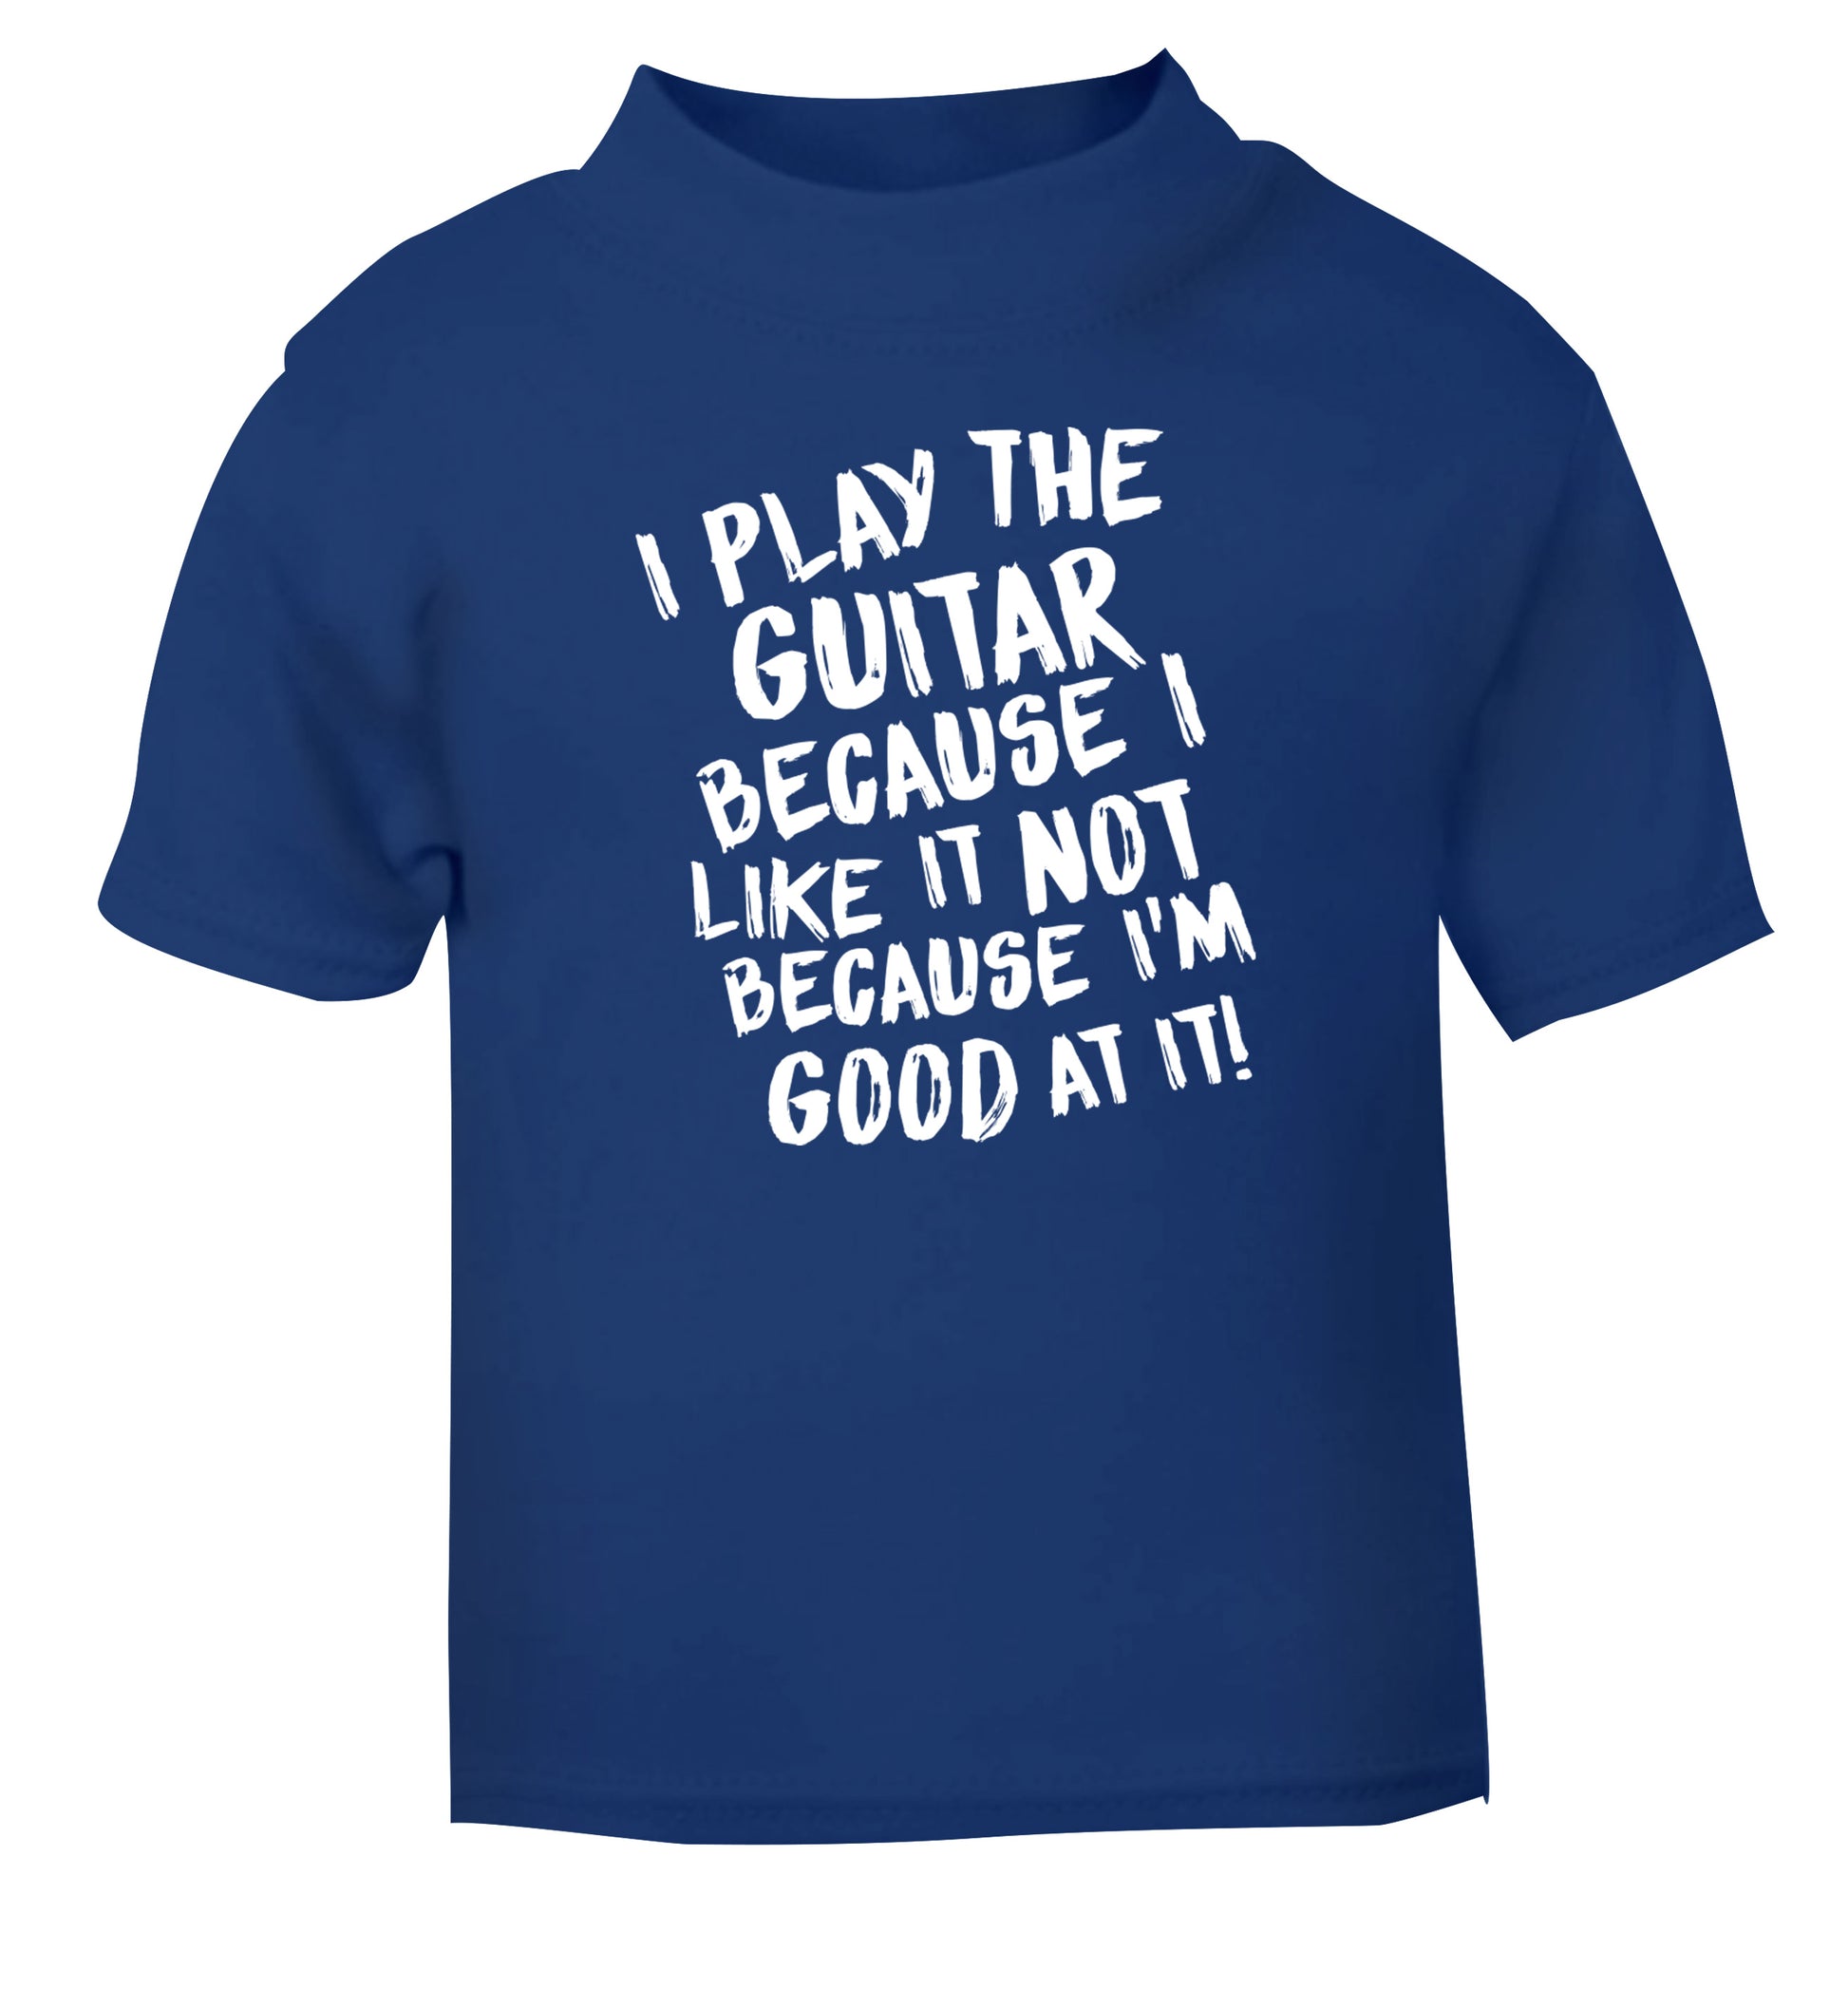 I play the guitar because I like it not because I'm good at it blue Baby Toddler Tshirt 2 Years